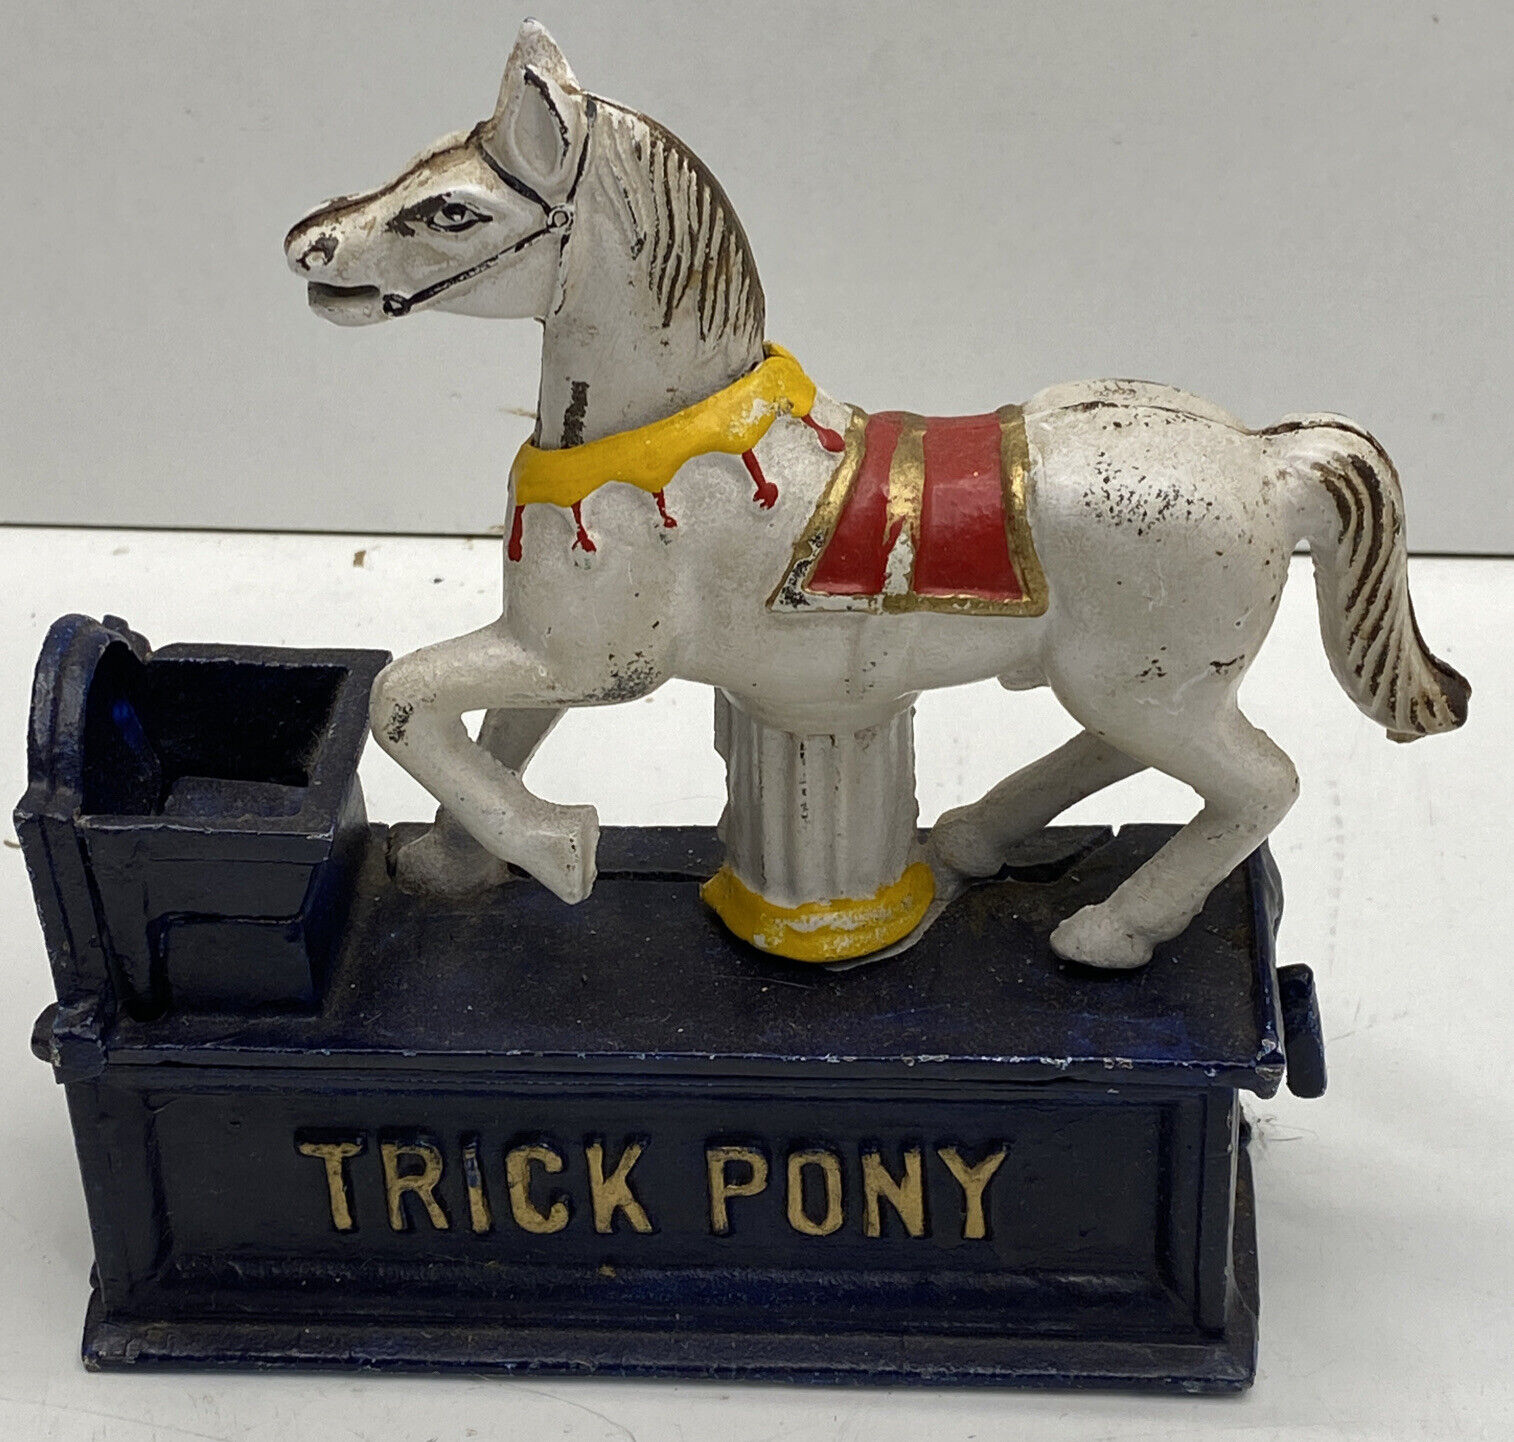 VTg Reproduction Cast Iron TRICK PONY Mechanical Coin Bank